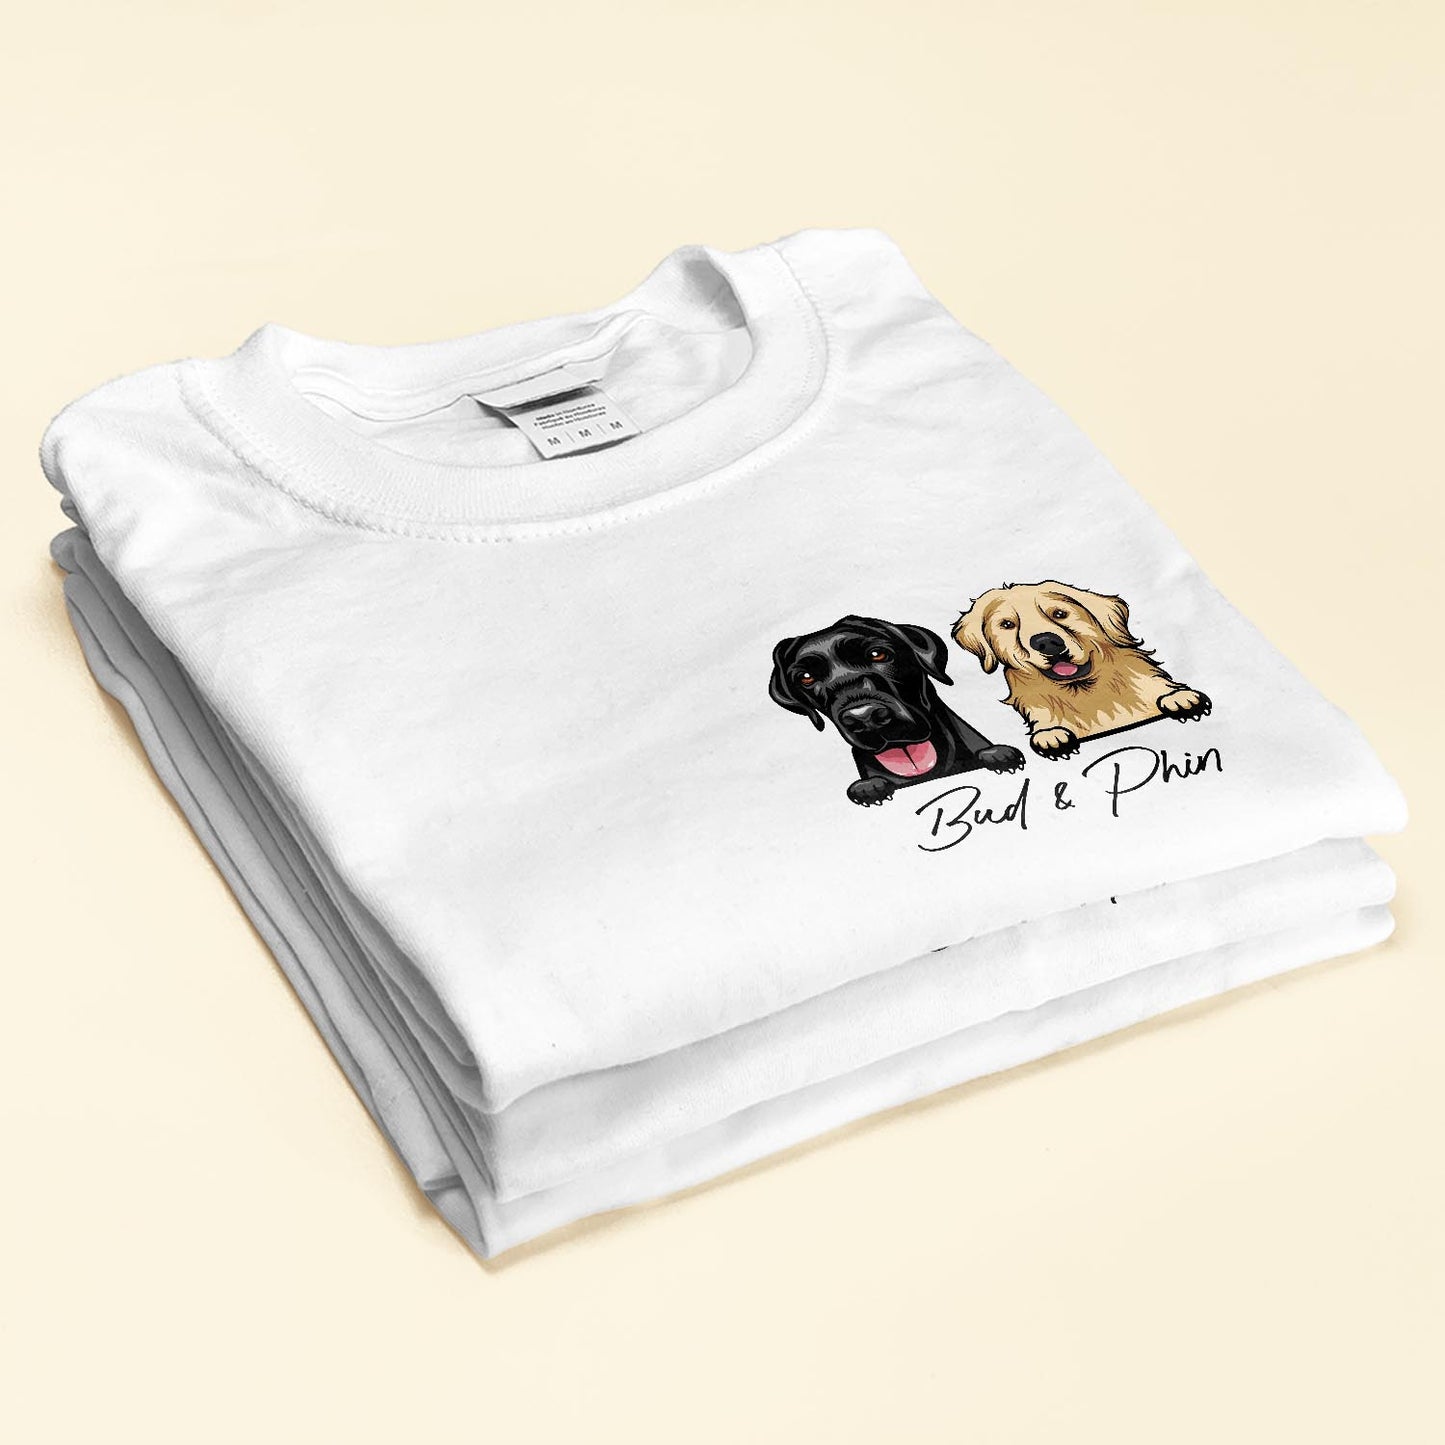 Dog Lover - Personalized Shirt - Birthday, Funny Gift For Dog Mom, Dog Dad, Cat Mom, Cat Dad, Pet Owner